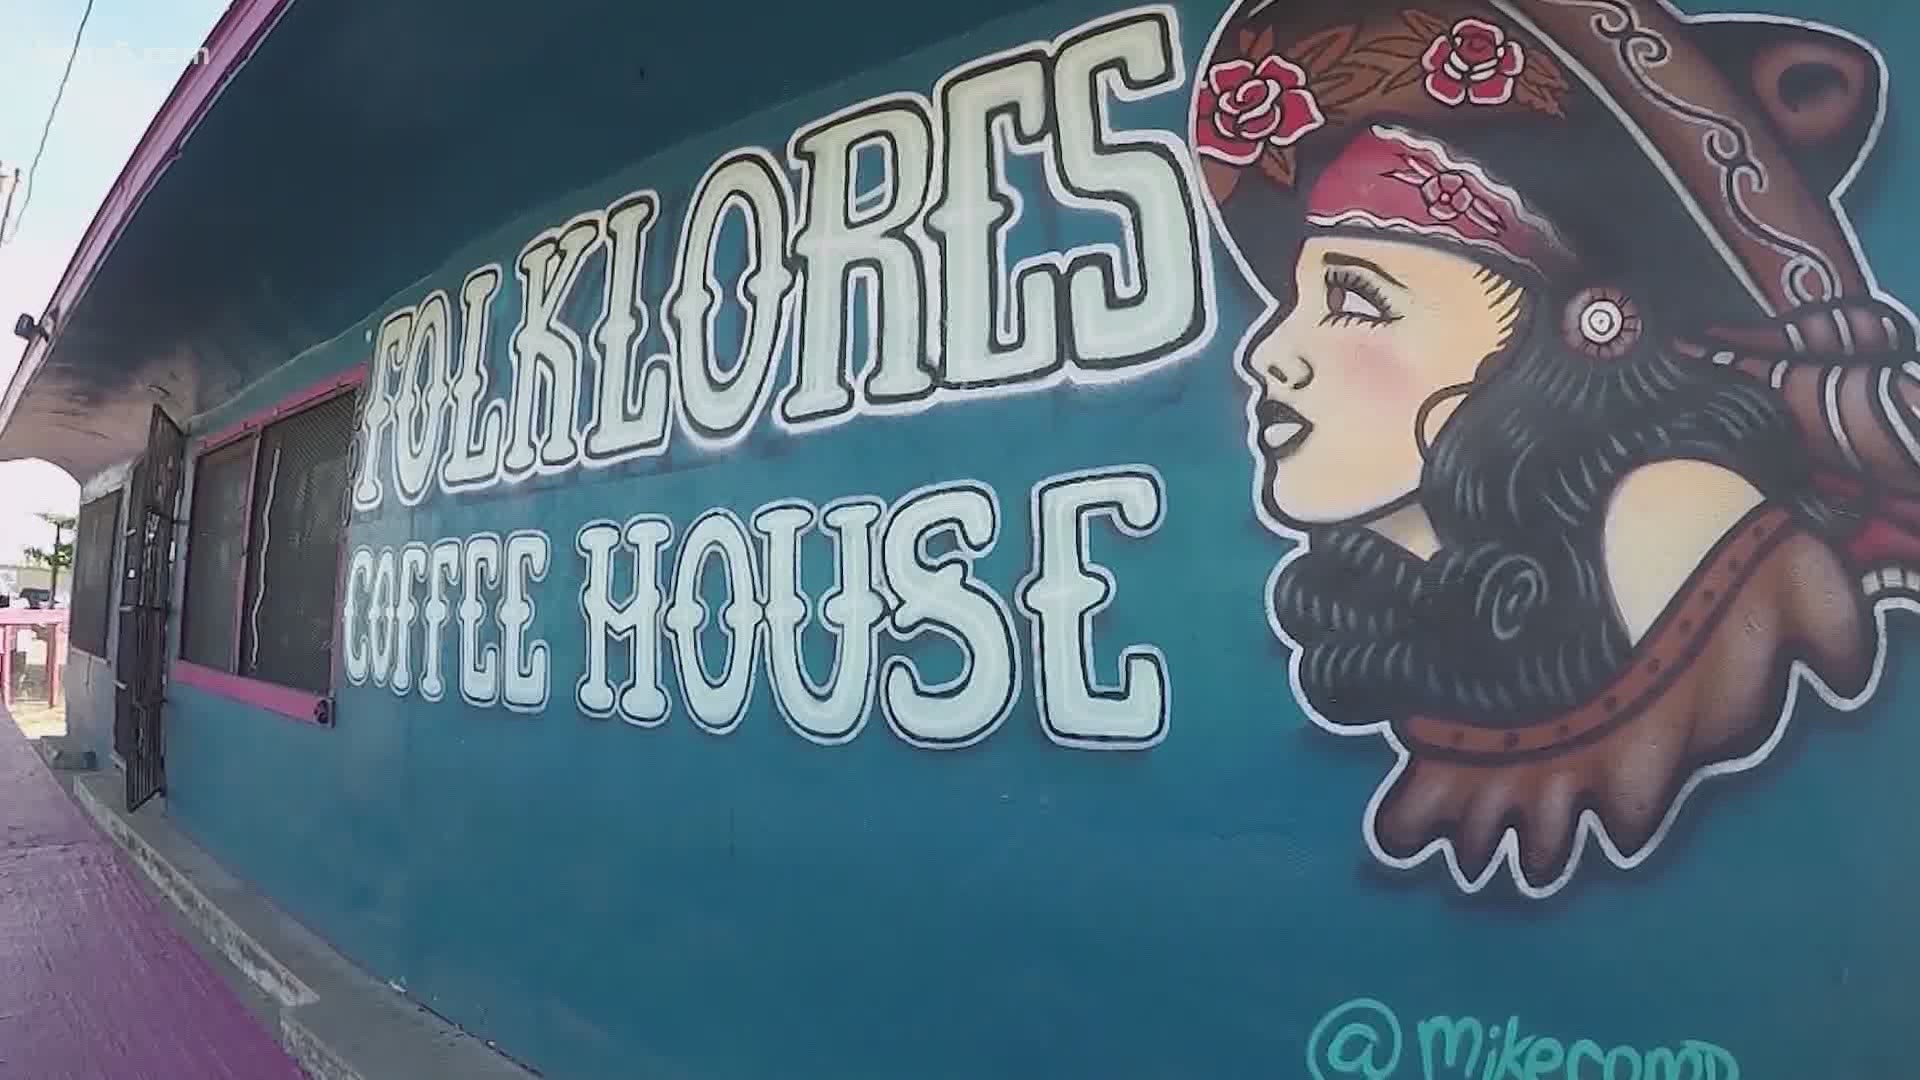 The owners of Folklores Coffee House have served 10,000 meals to seniors in the last 12 weeks, but in three weeks of being open, they've made just $400.